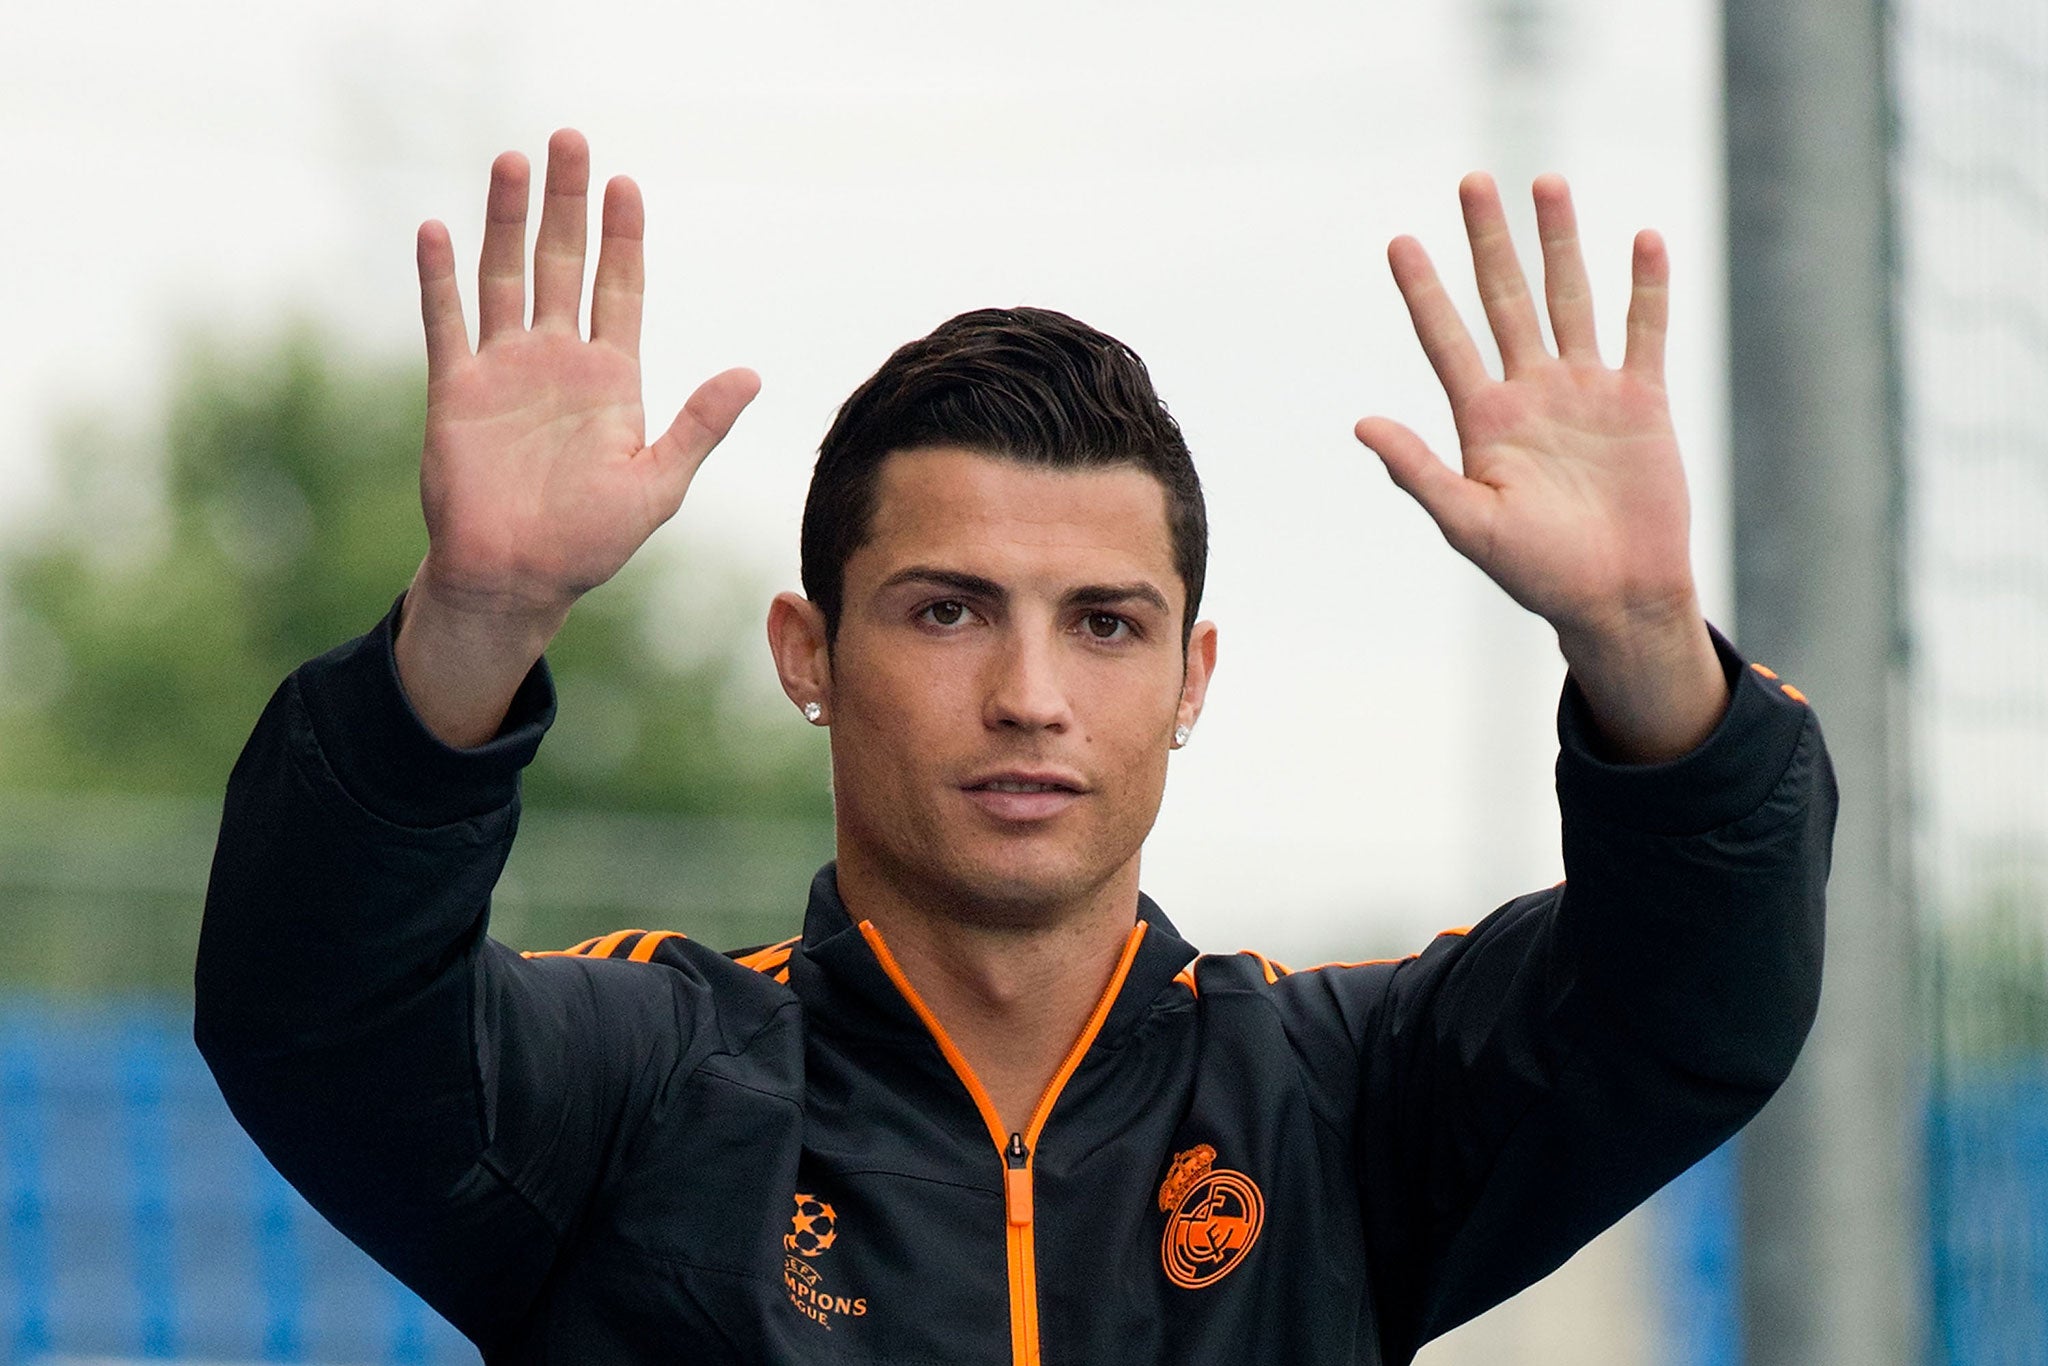 Cristiano Ronaldo has been forced to undergo a 'specially adapted' training schedule